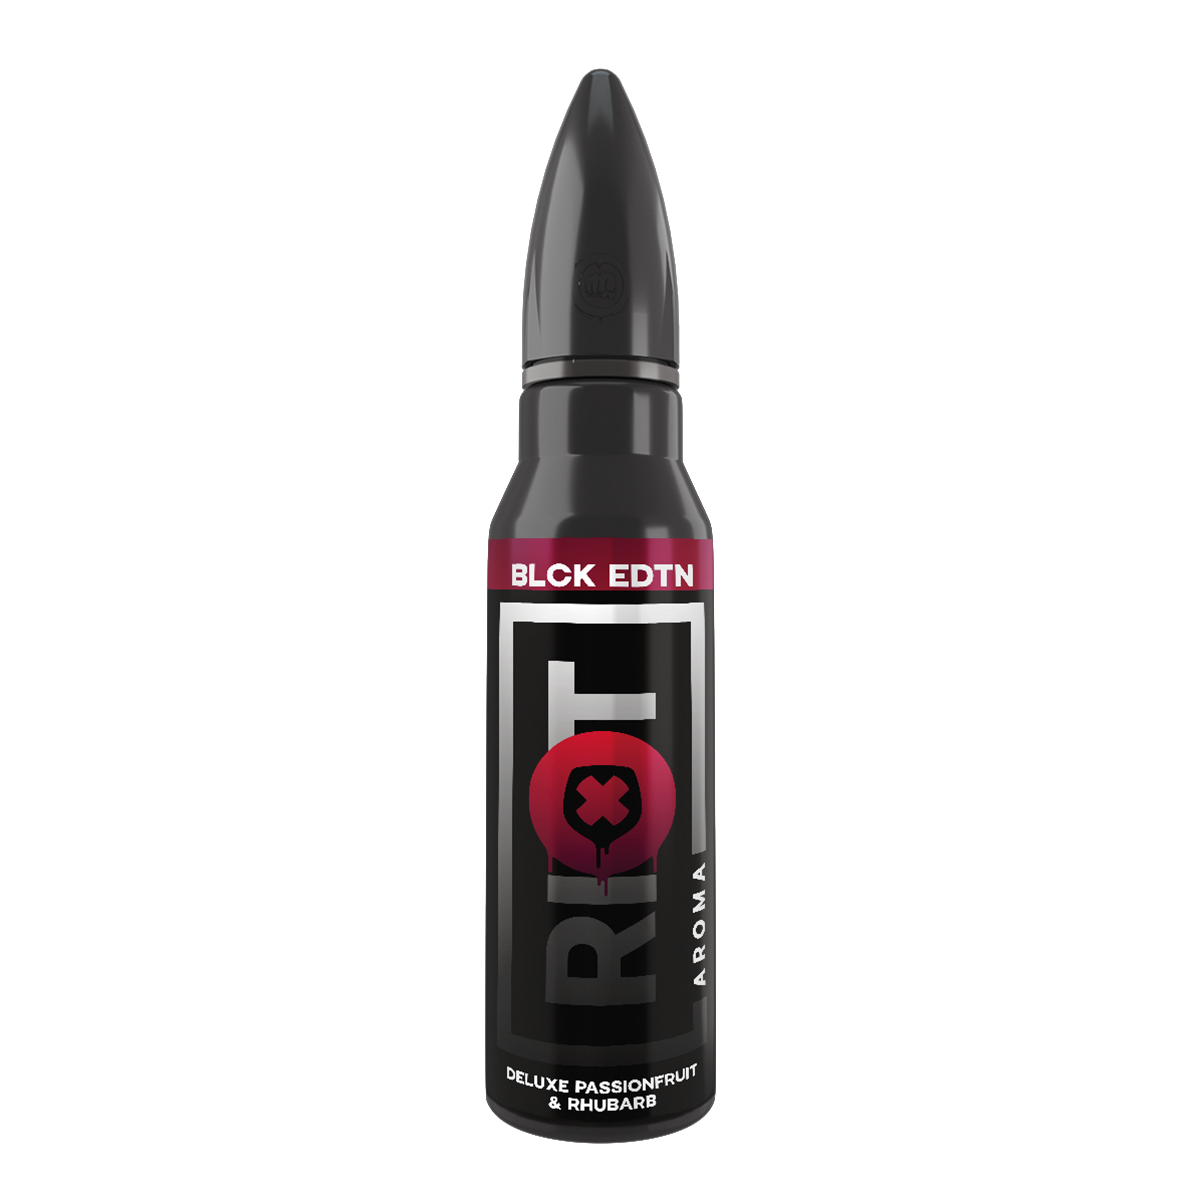 Riot Squad - Black Edition - Deluxe Passionfruit & Rhubarb 15ml Aroma 